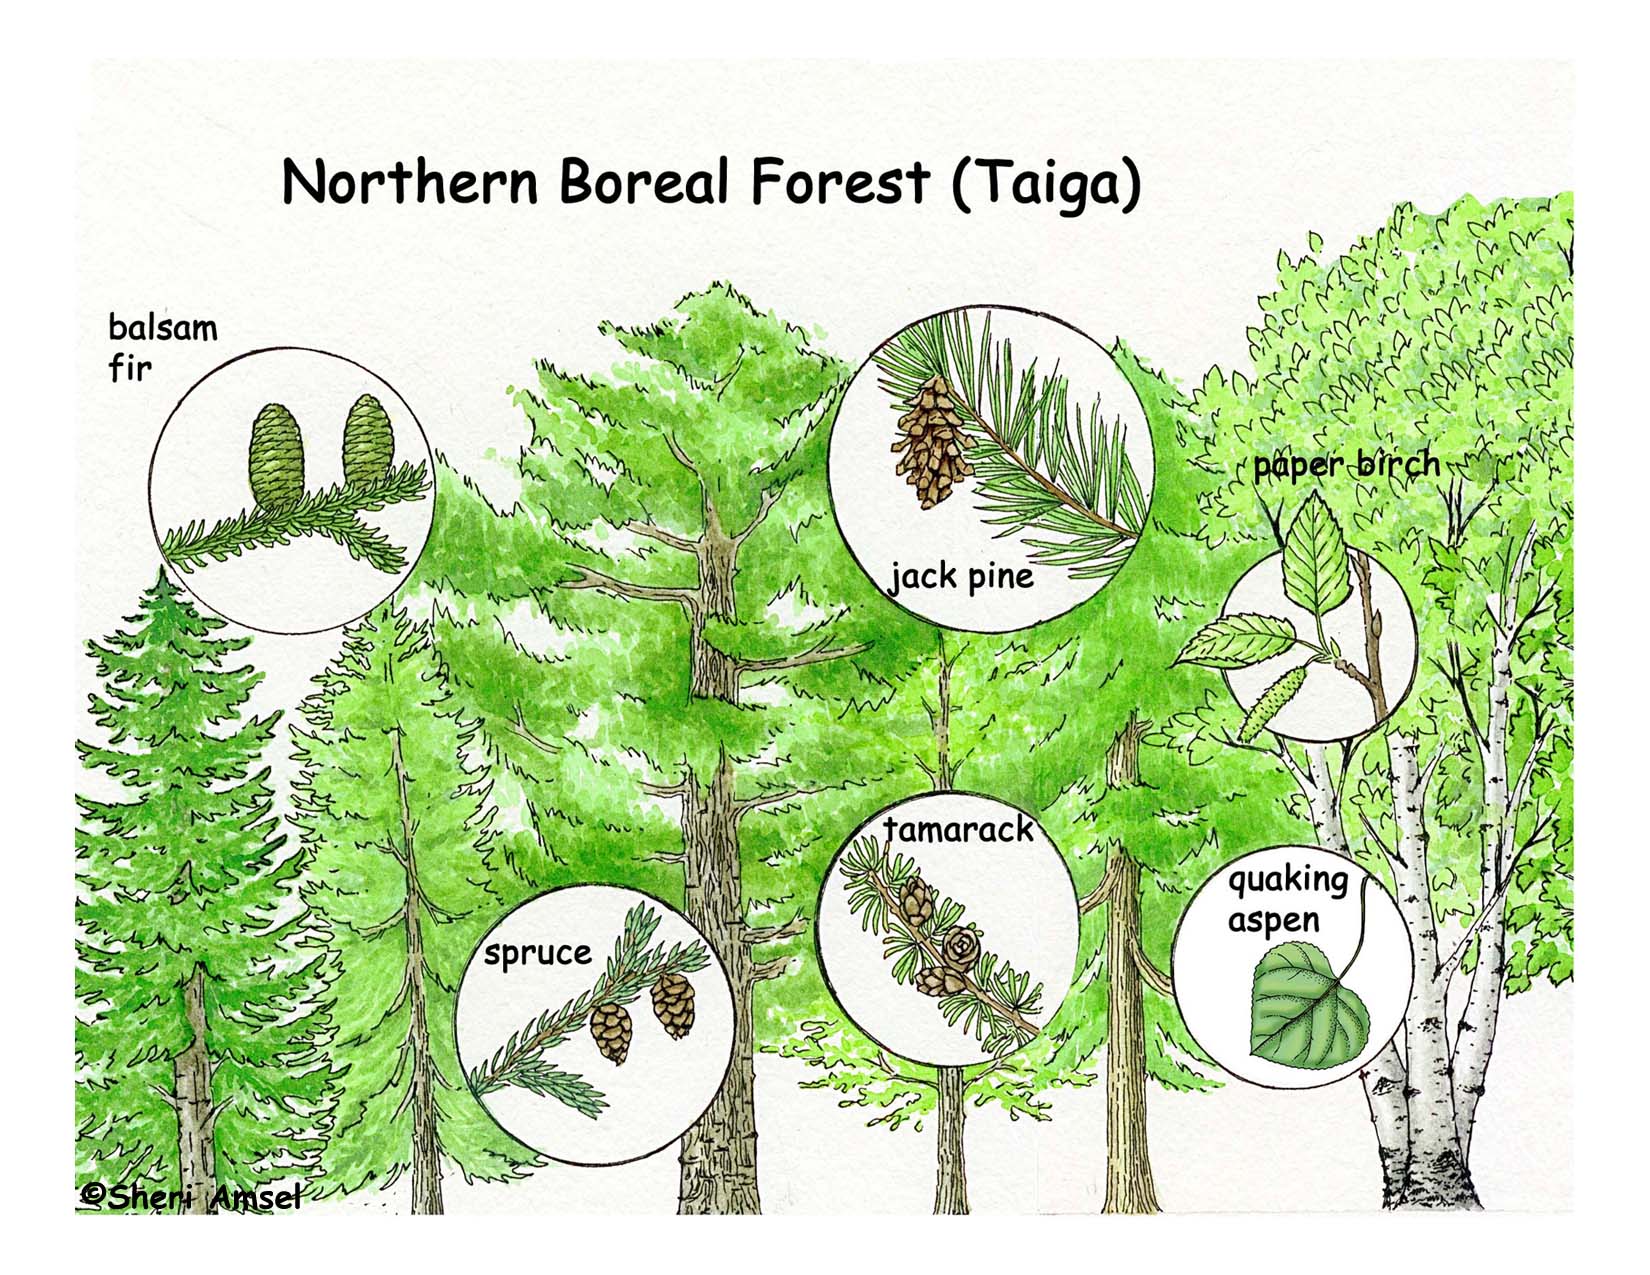 Plants Of The Taiga: A List Of Taiga Plants With Pictures & Facts